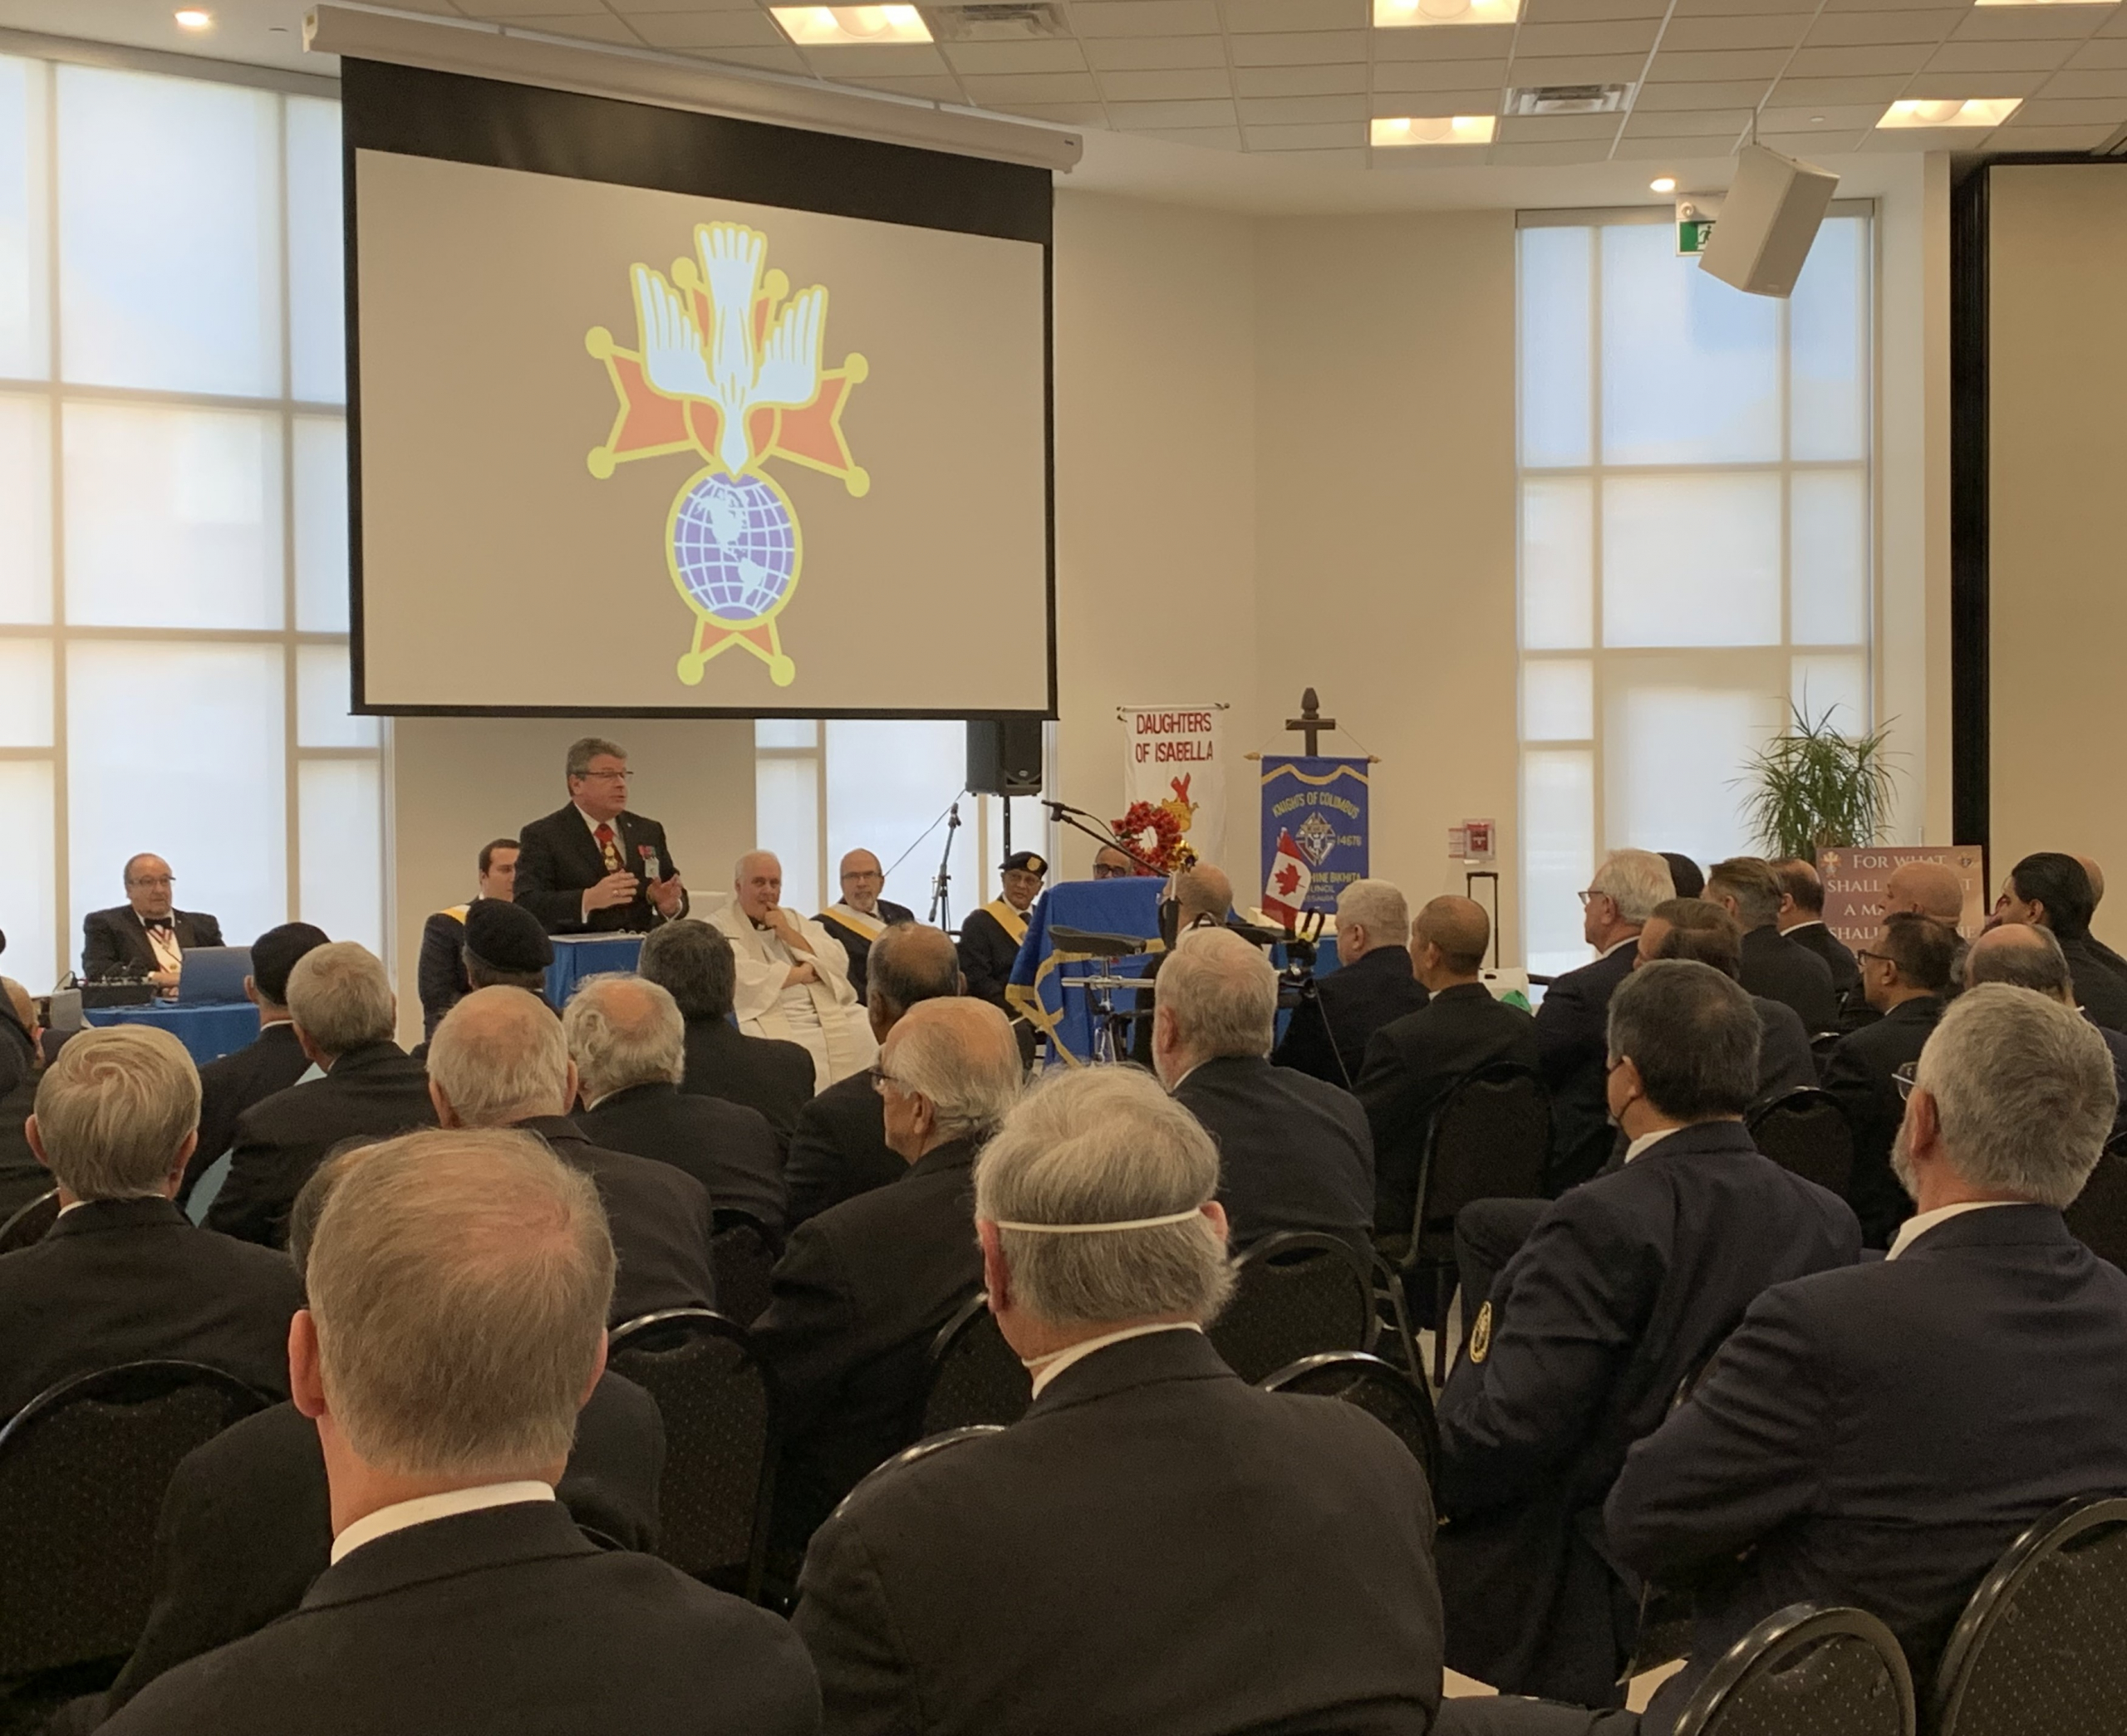 Following the exemplification ceremony the State Deputy, Bruce S. Poulin, was invited to address the Sir Knights, the ladies and guests during the ourth Degree Exemplification on November 18, 2023